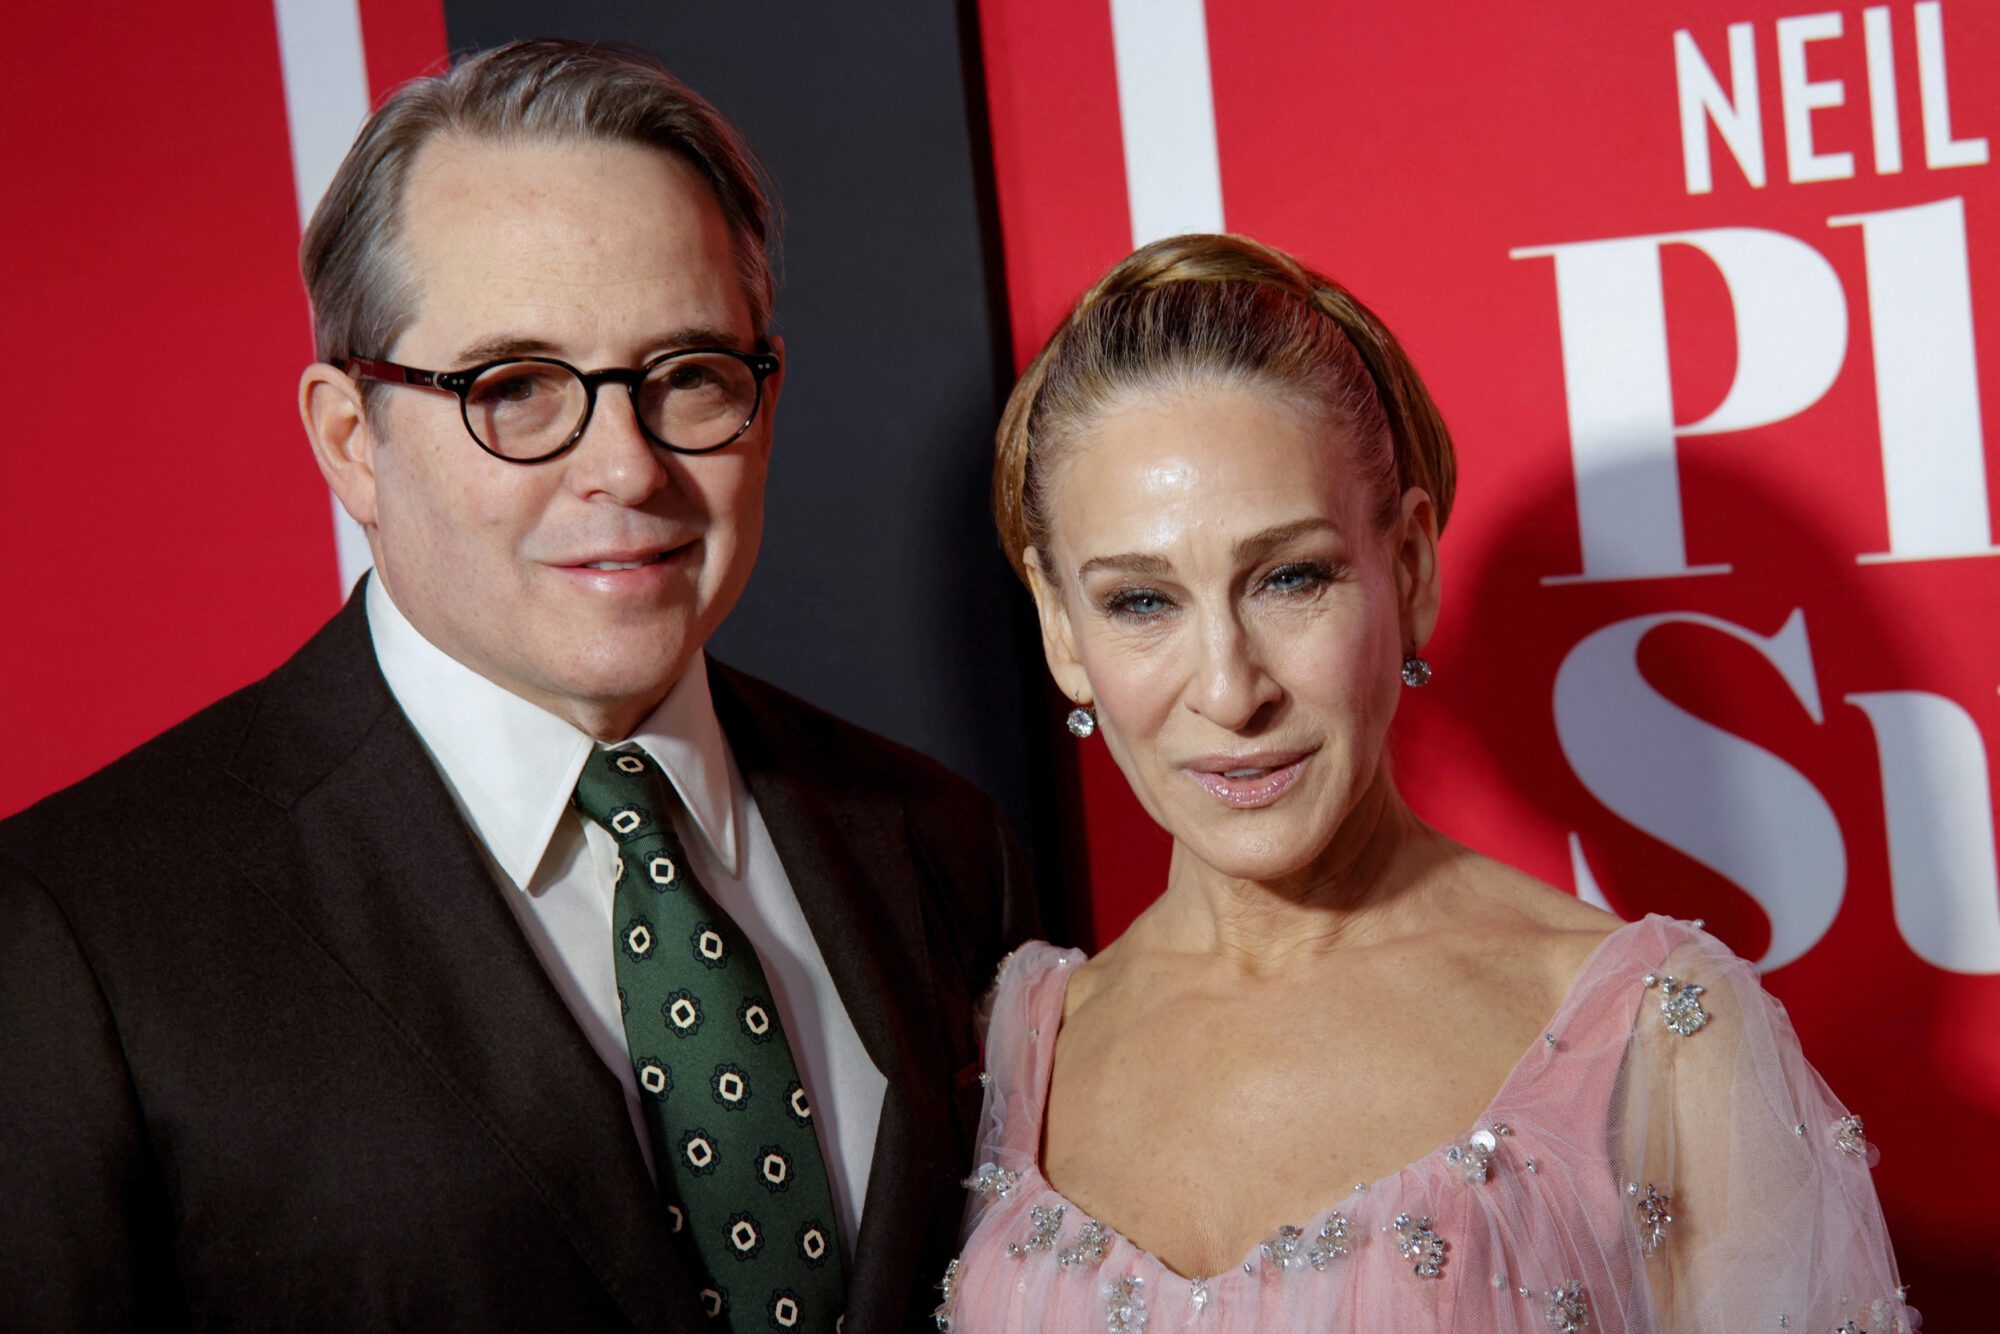 Sarah Jessica Parker and Matthew Broderick arrive to celebrate the opening of their new play, 'Plaza Suite' in New York City, U.S., March 28, 2022. REUTERS